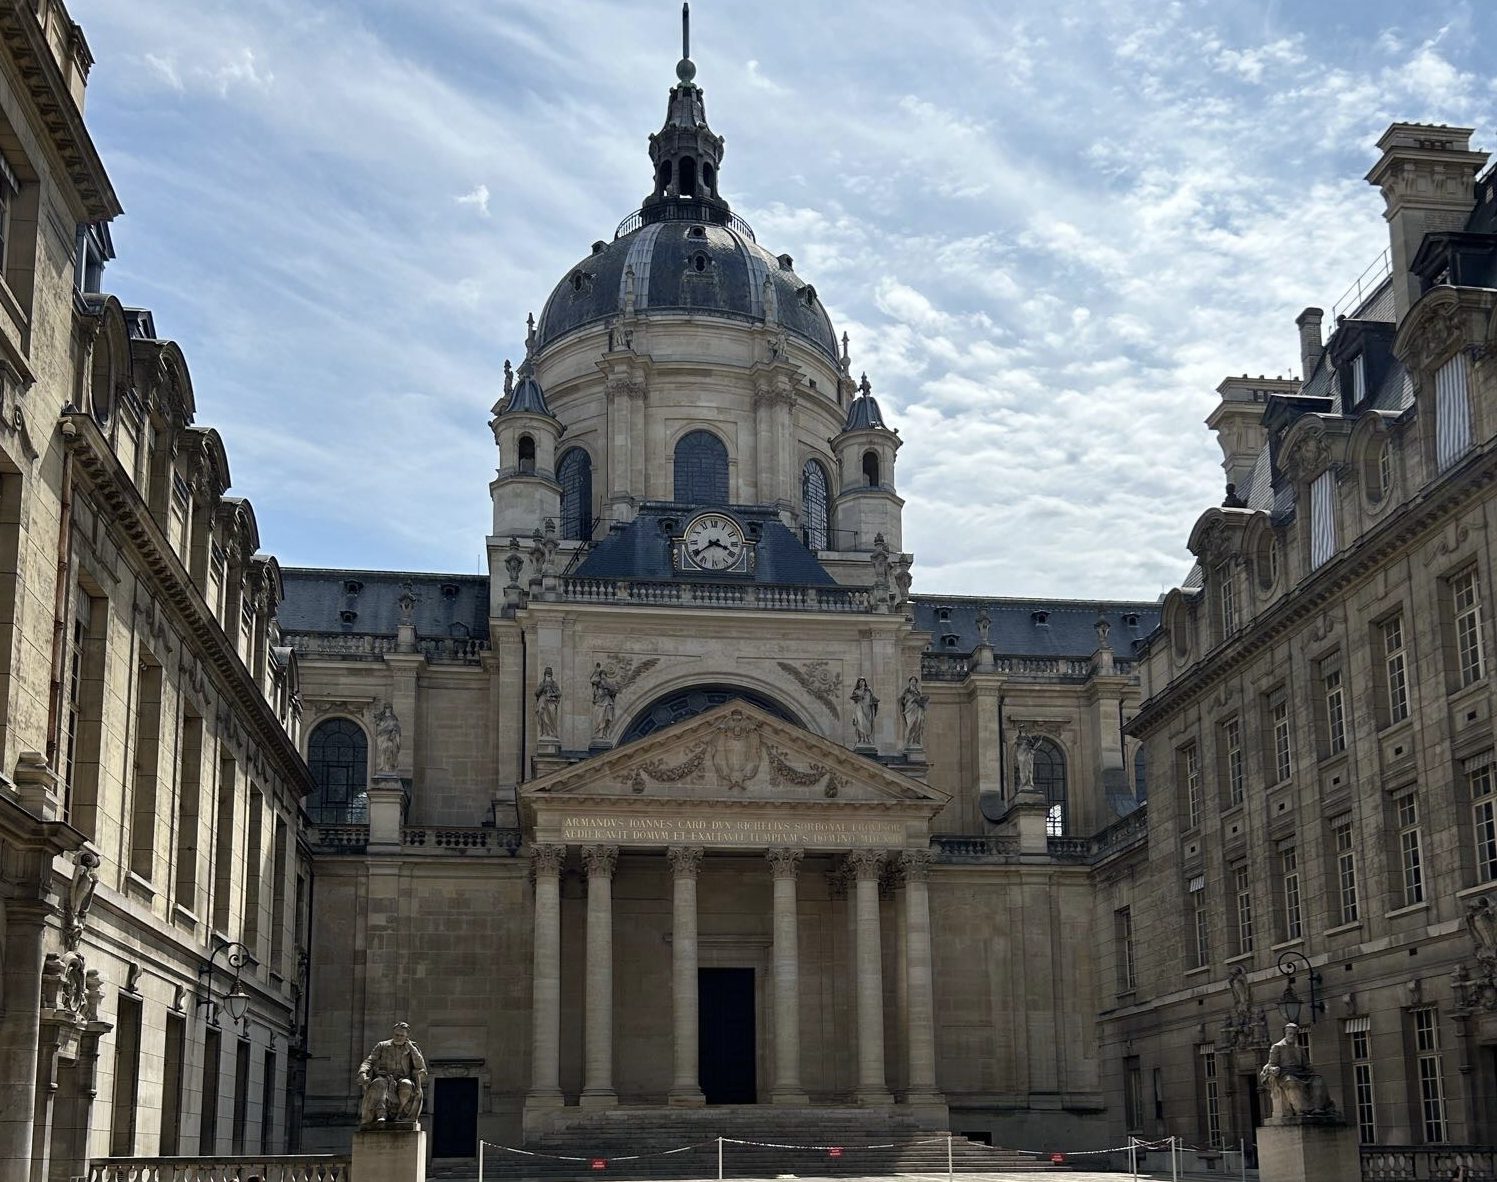 With its Neo-Renaissance style architecture, the Sorbonne University was temporary home to senior Sasha Fels. Traveling over 4,000 miles, she was immersed in the french experience.